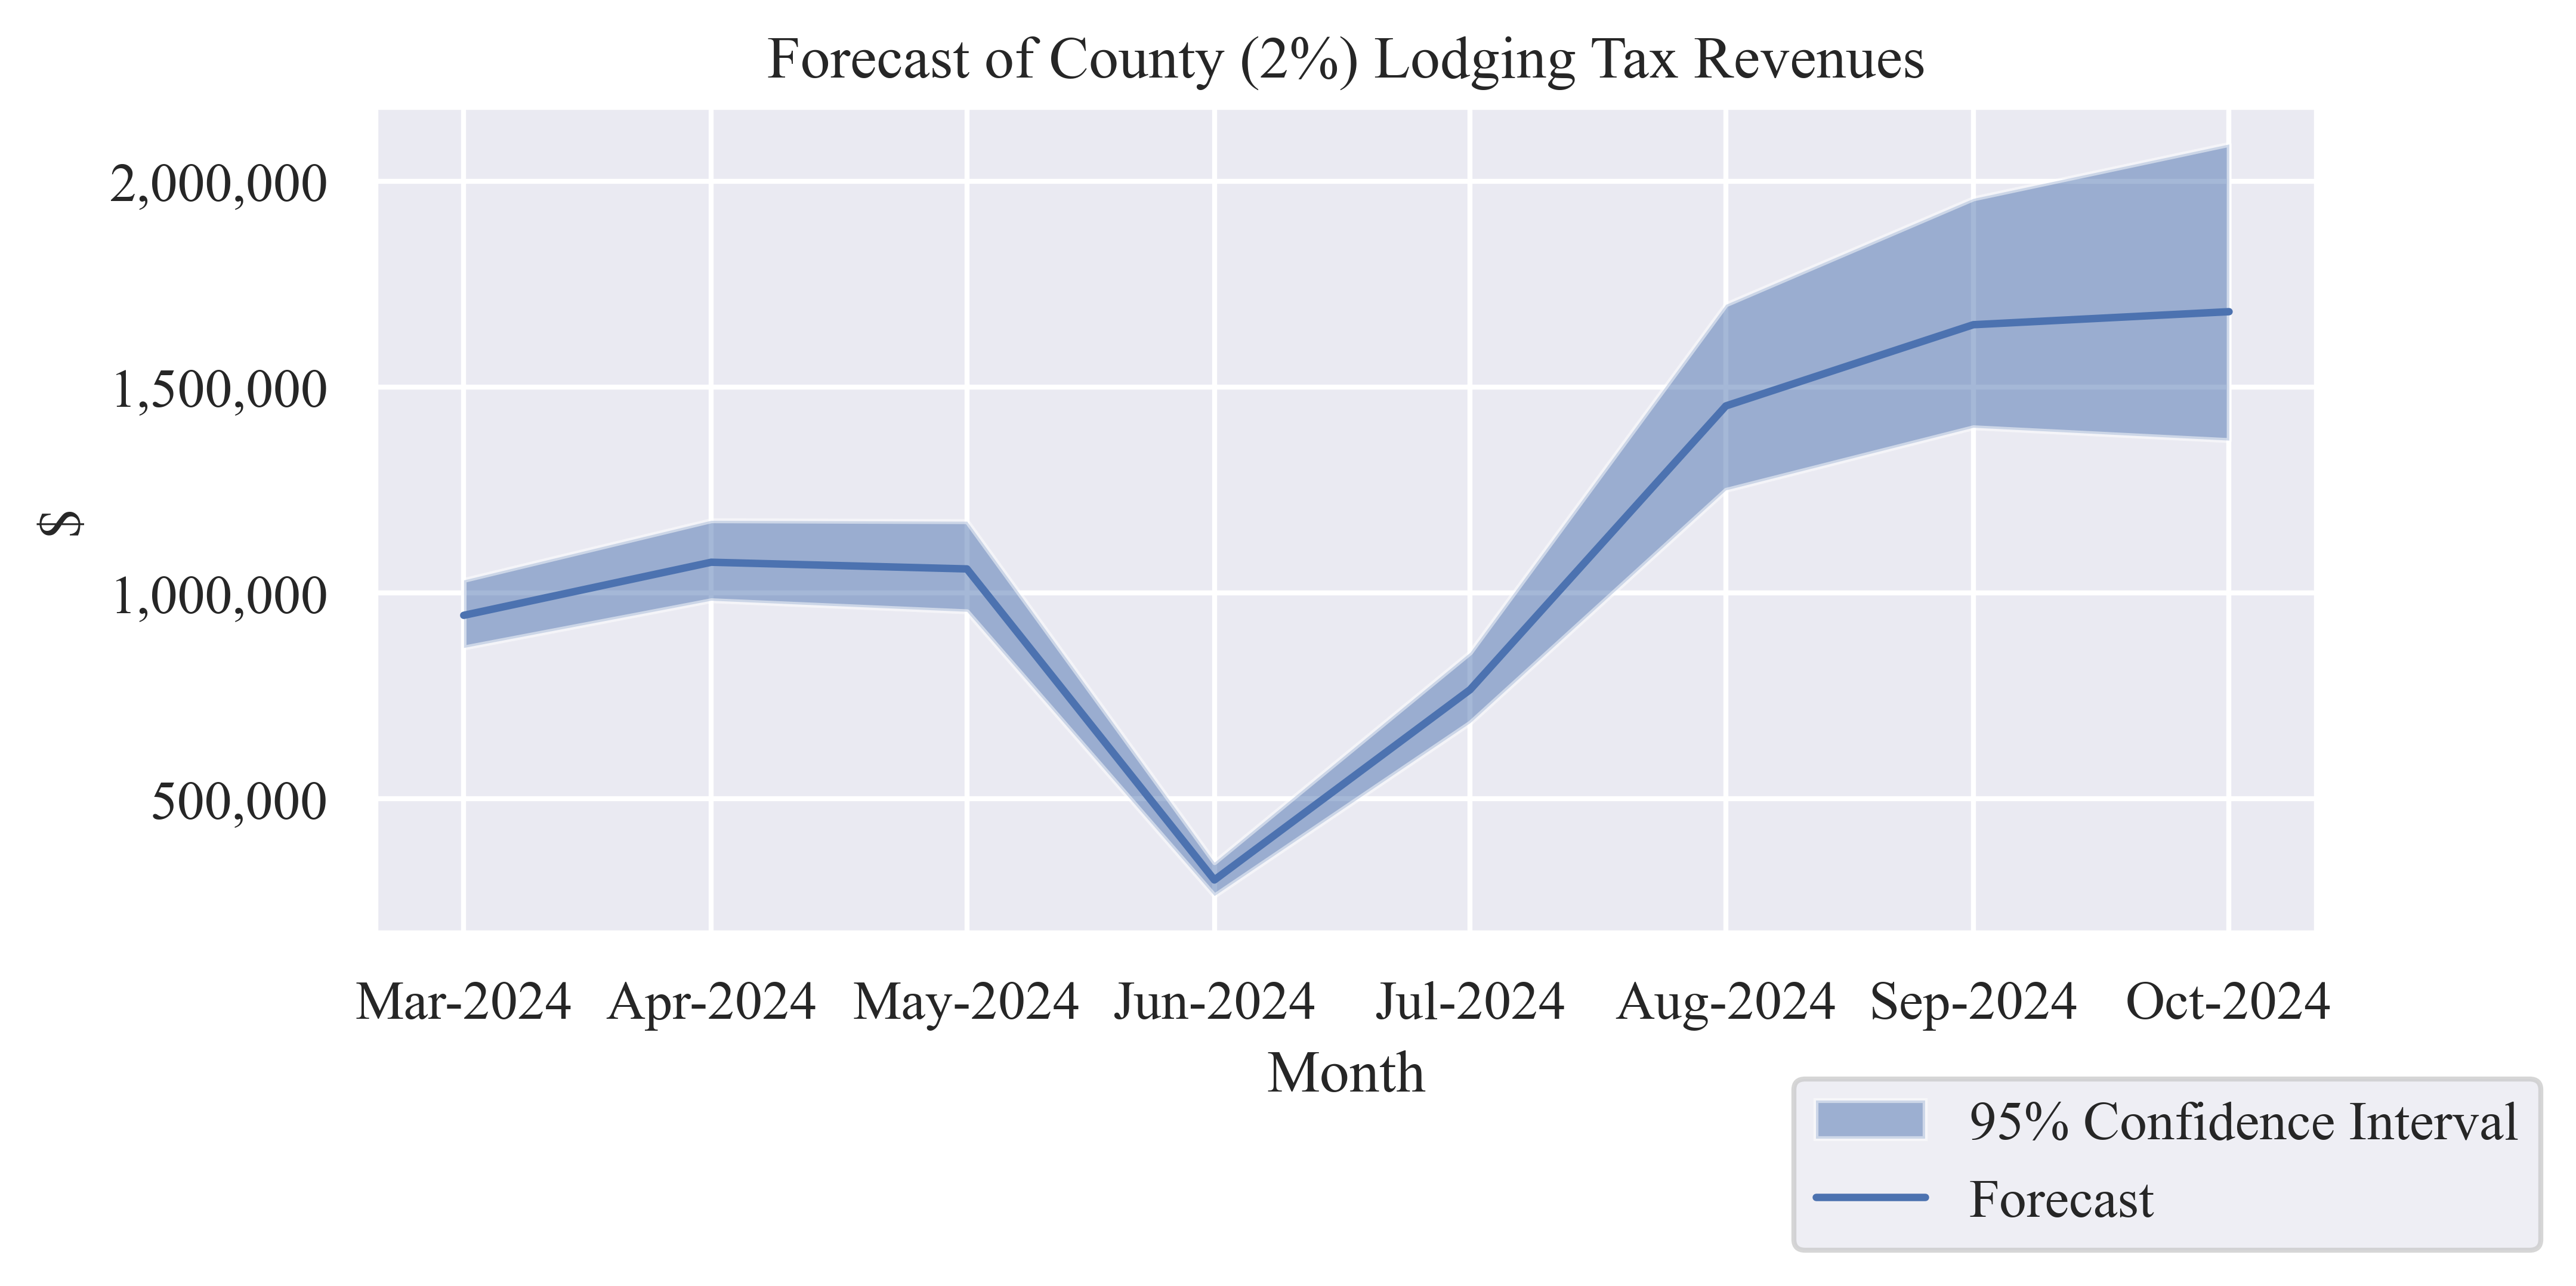 Table 4: Forecast County (2%) Lodging Tax Revenue